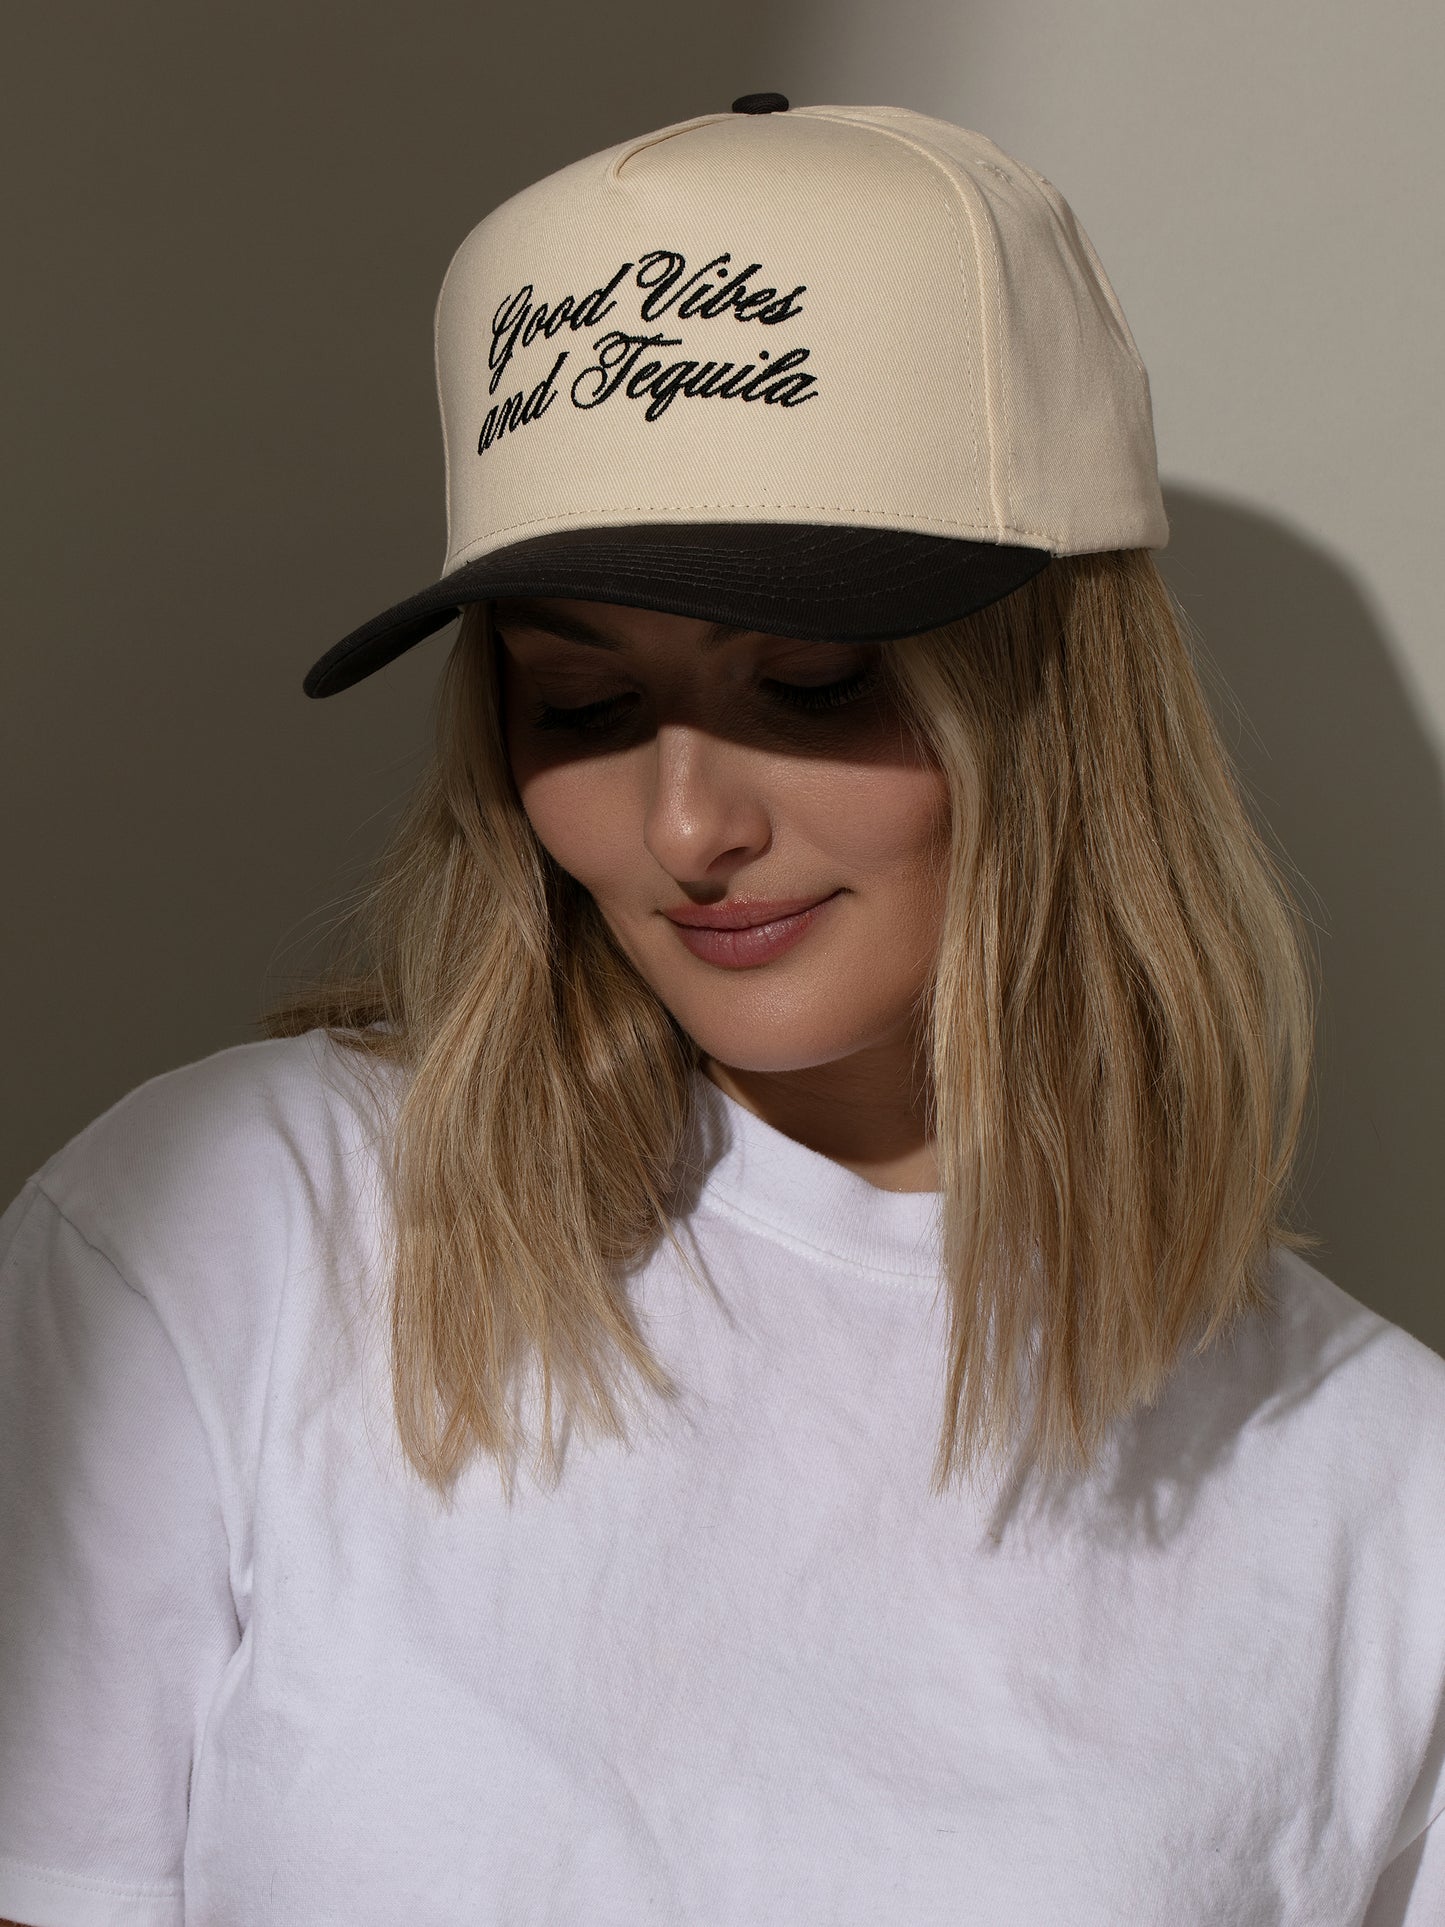 Tequila Vibes Trucker Hat | Charcoal/Tan | Model Image 2 | Uncommon Lifestyle